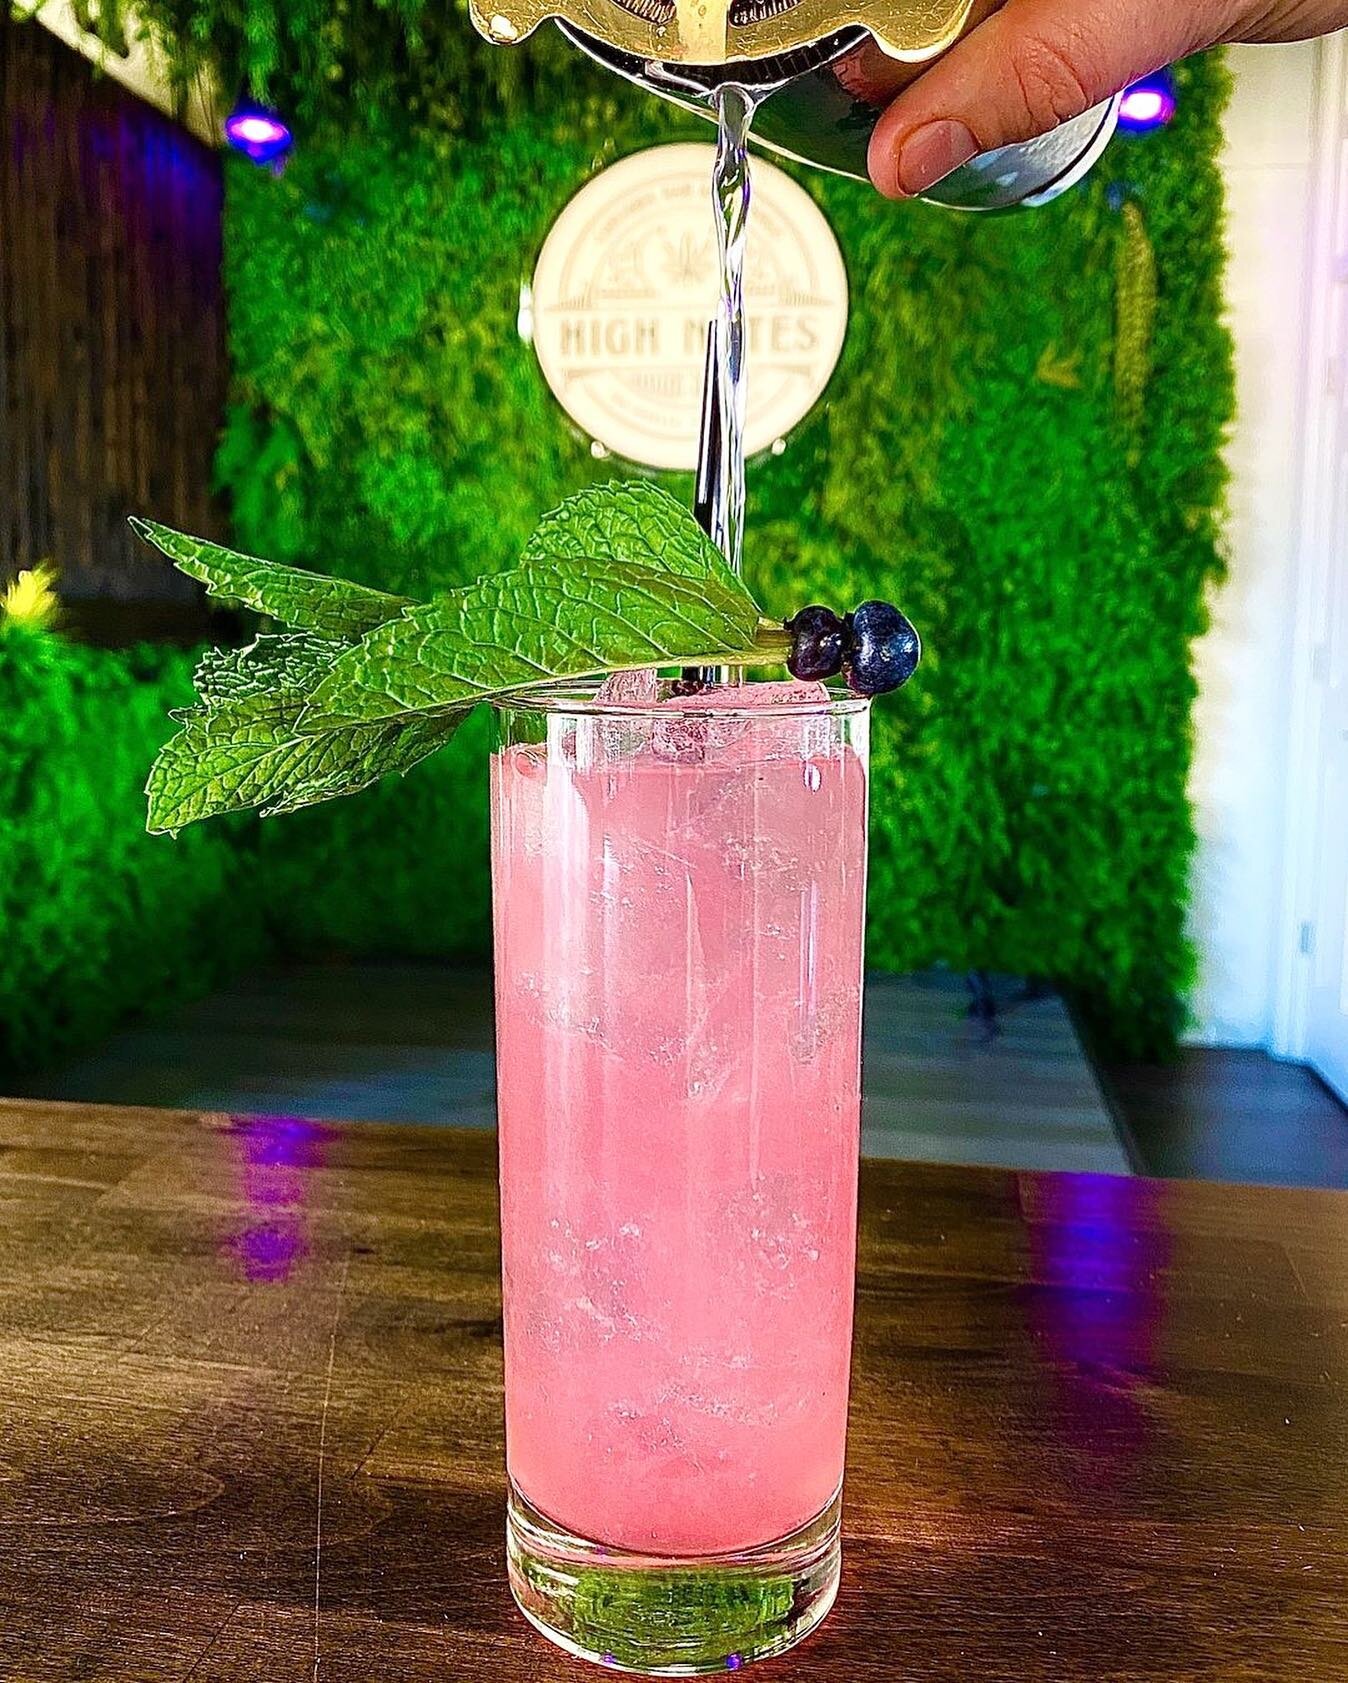 Elevate your Good Friday with a sip of perfection! Join us as we raise a glass to good vibes and great cocktails. Cheers to the start of a fantastic weekend! 

Blueberry Yum Yum
Blueberry Vodka, Elderflower, Blueberry, Raspberry, Blackberry and Lime 